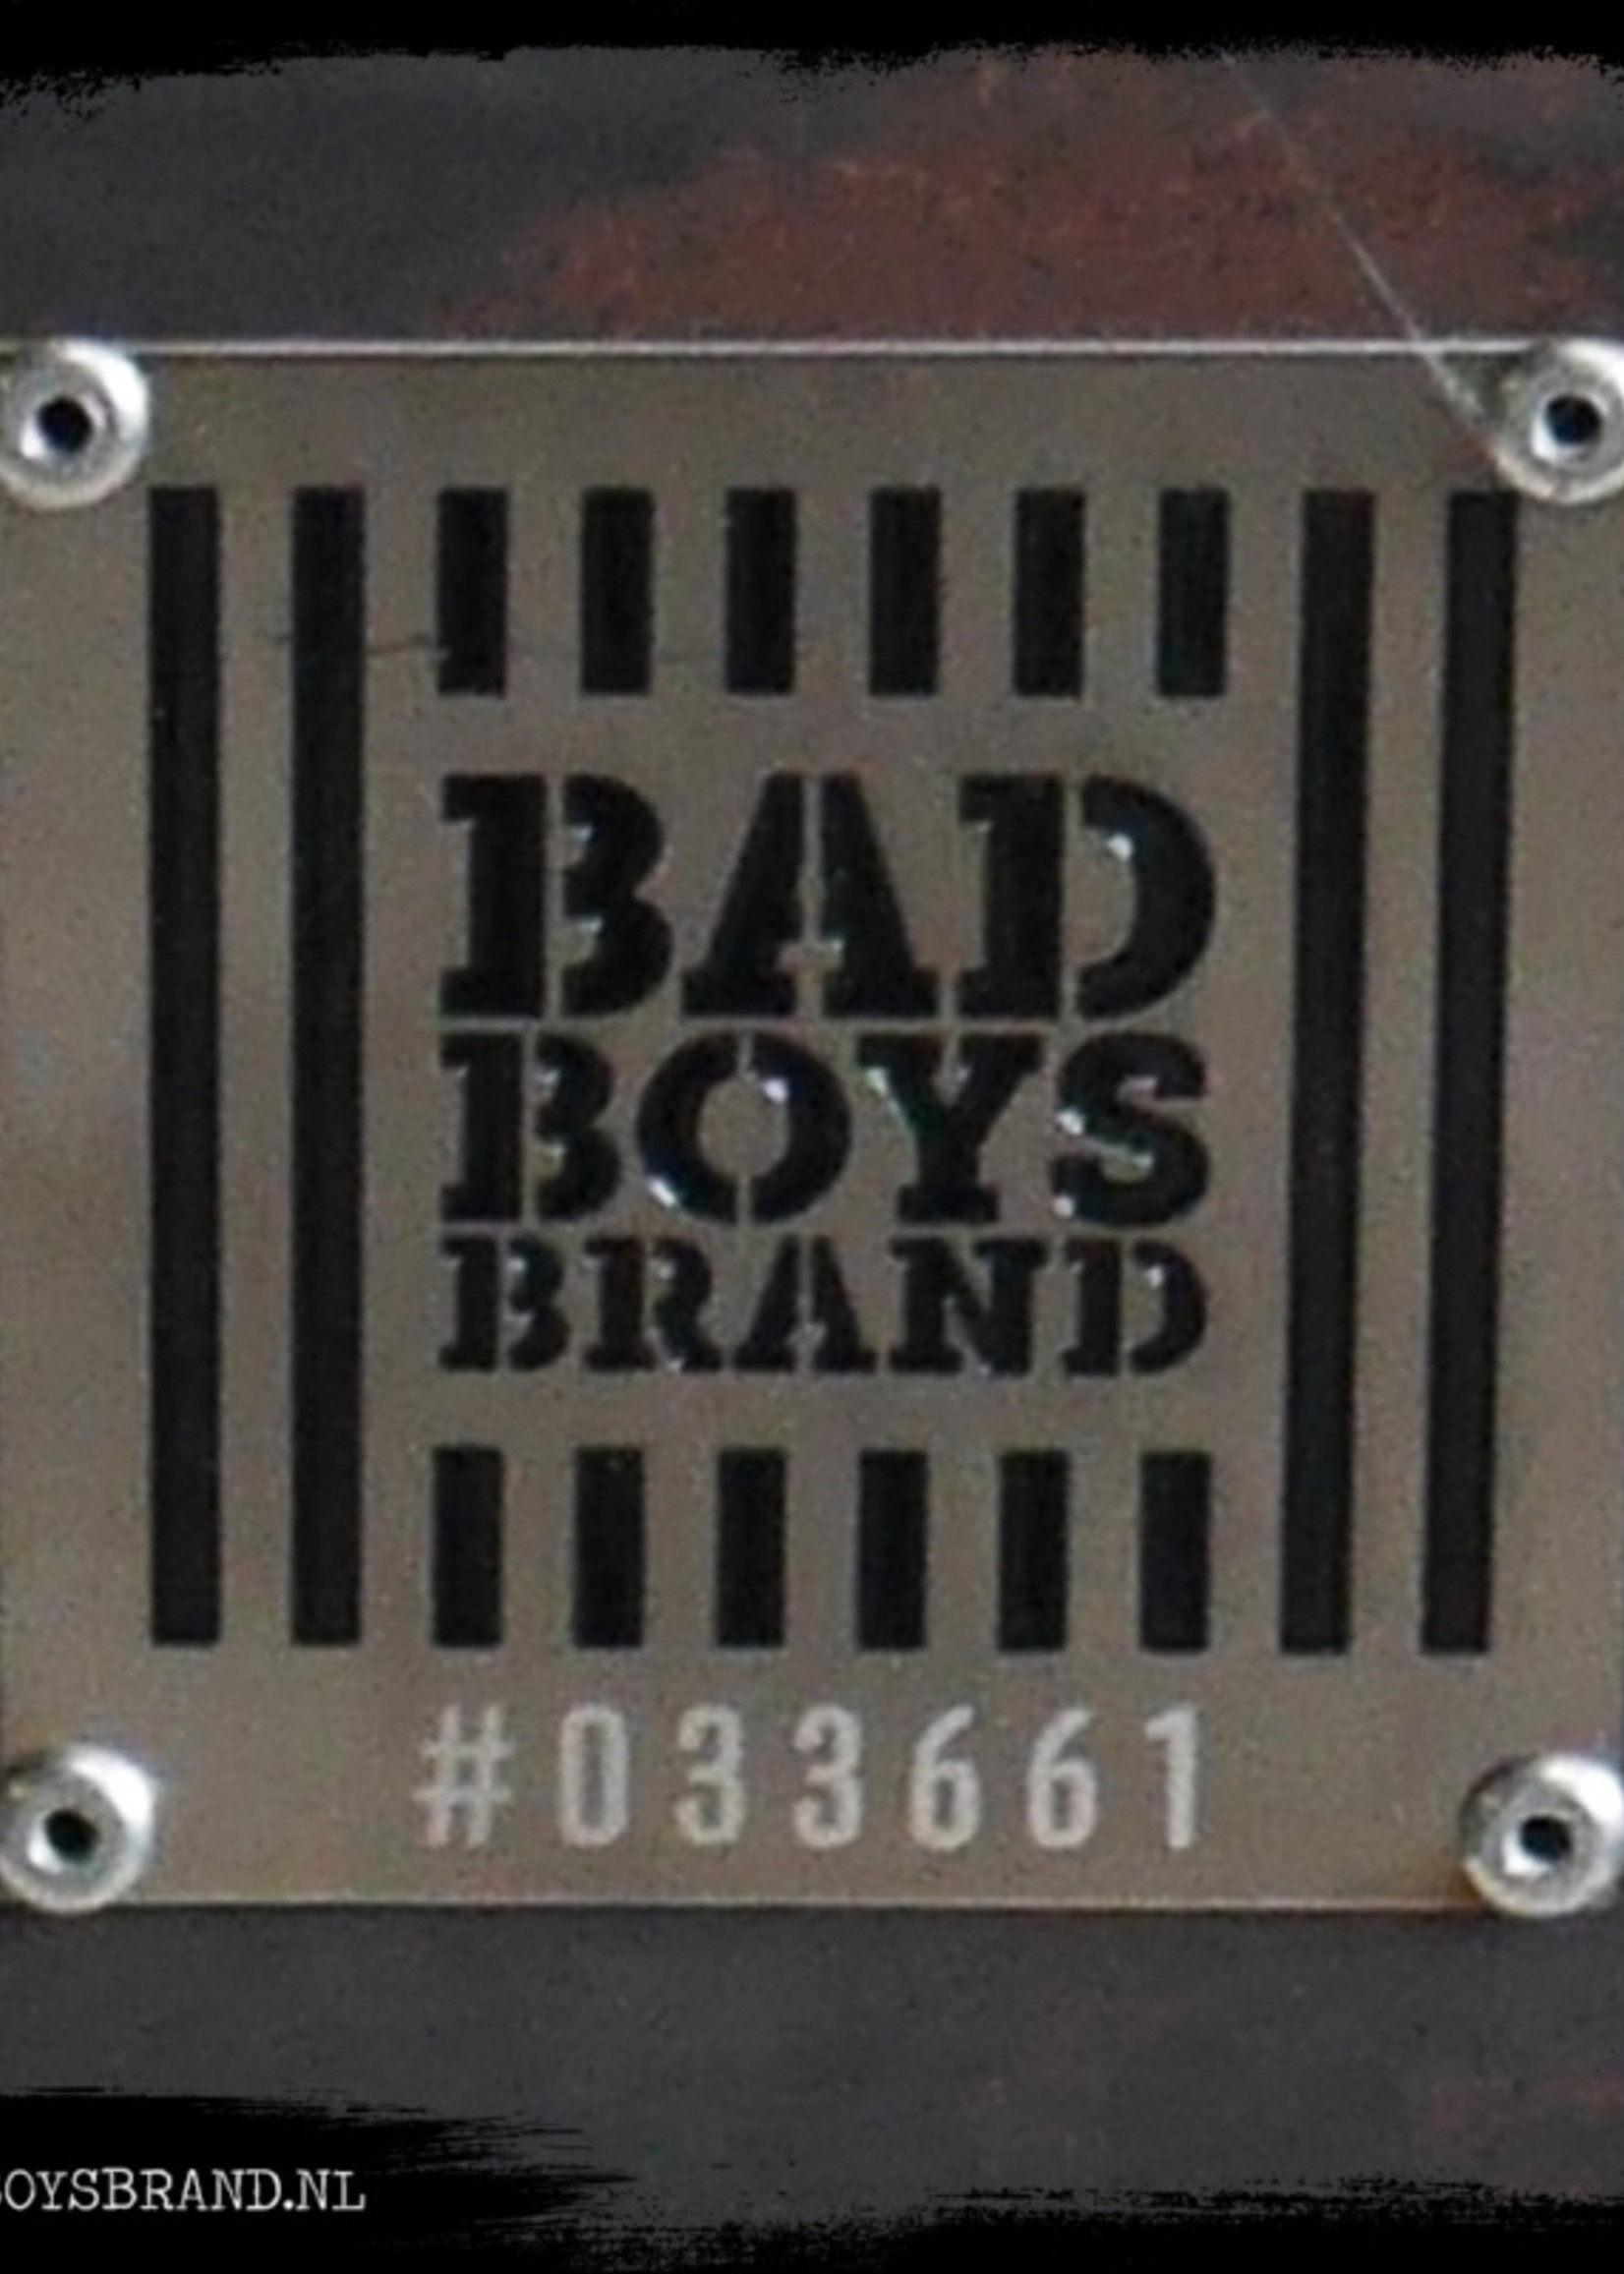 Bad Boys Brand Thumbs Up - Outdoor Fireplace - BadBoys Fire Made in Jail - 168cm - Steel - 100% Made in Jail